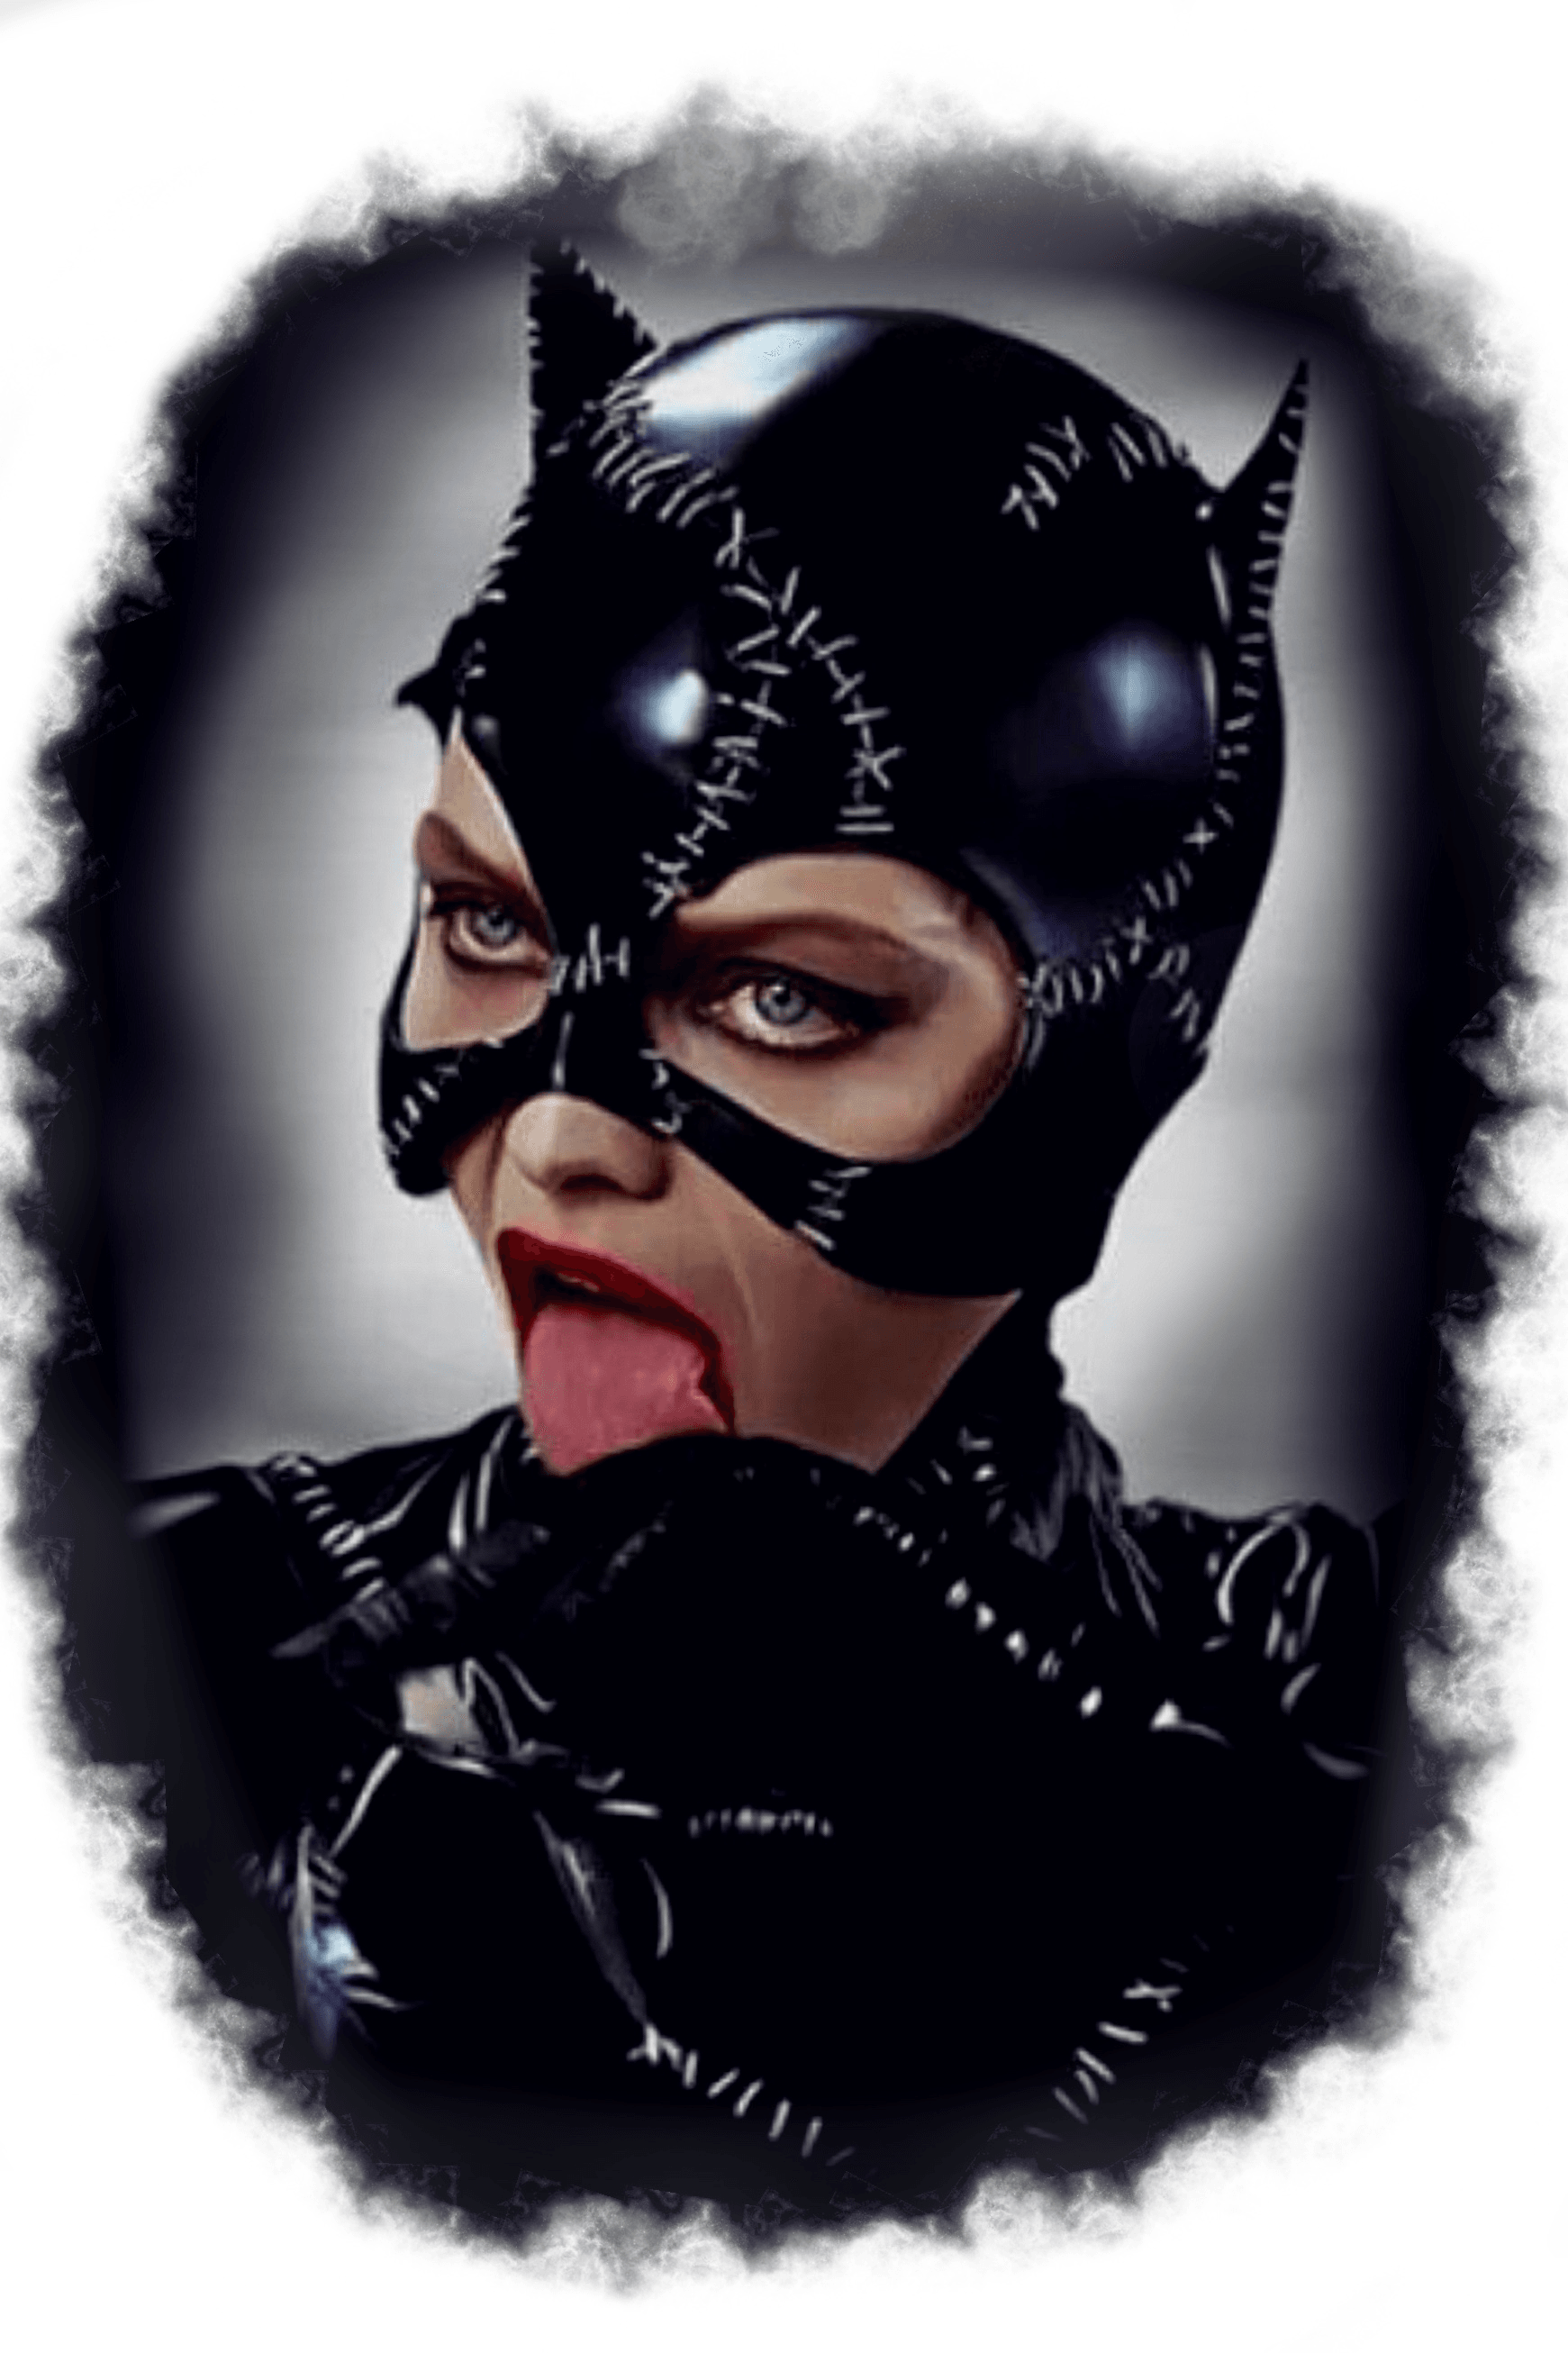 Awesome catwoman tattoo done by Pablo Frias  9GAG